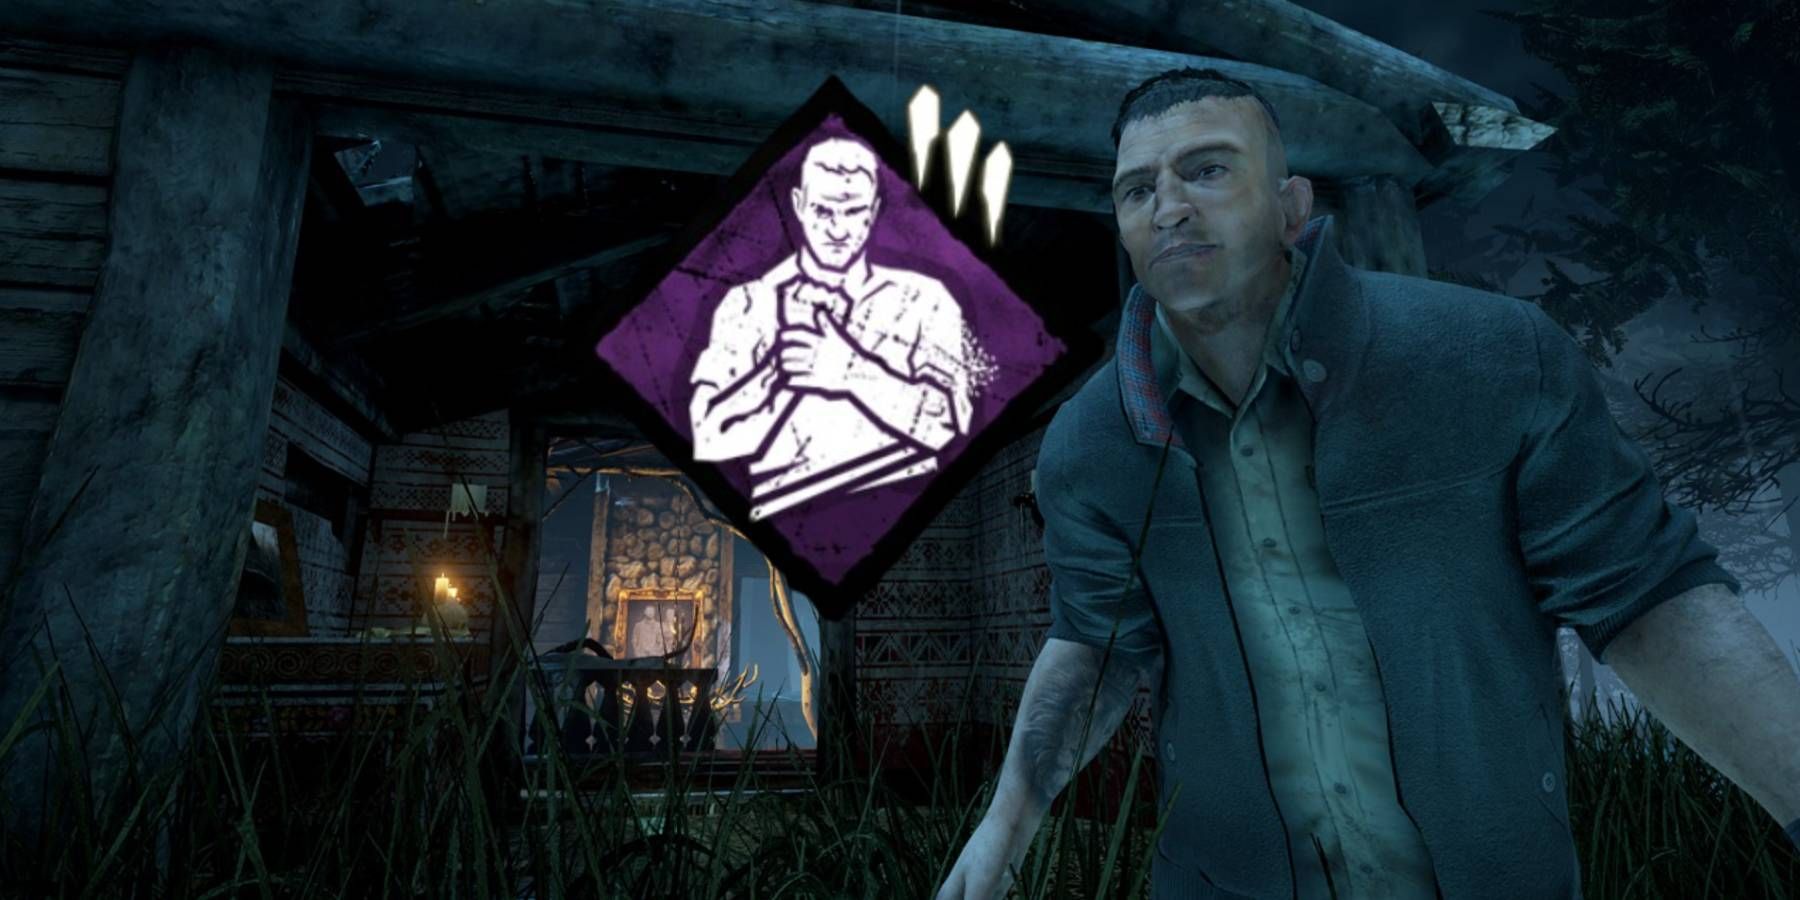 David King and the No Mither perk emblem from Dead by Daylight